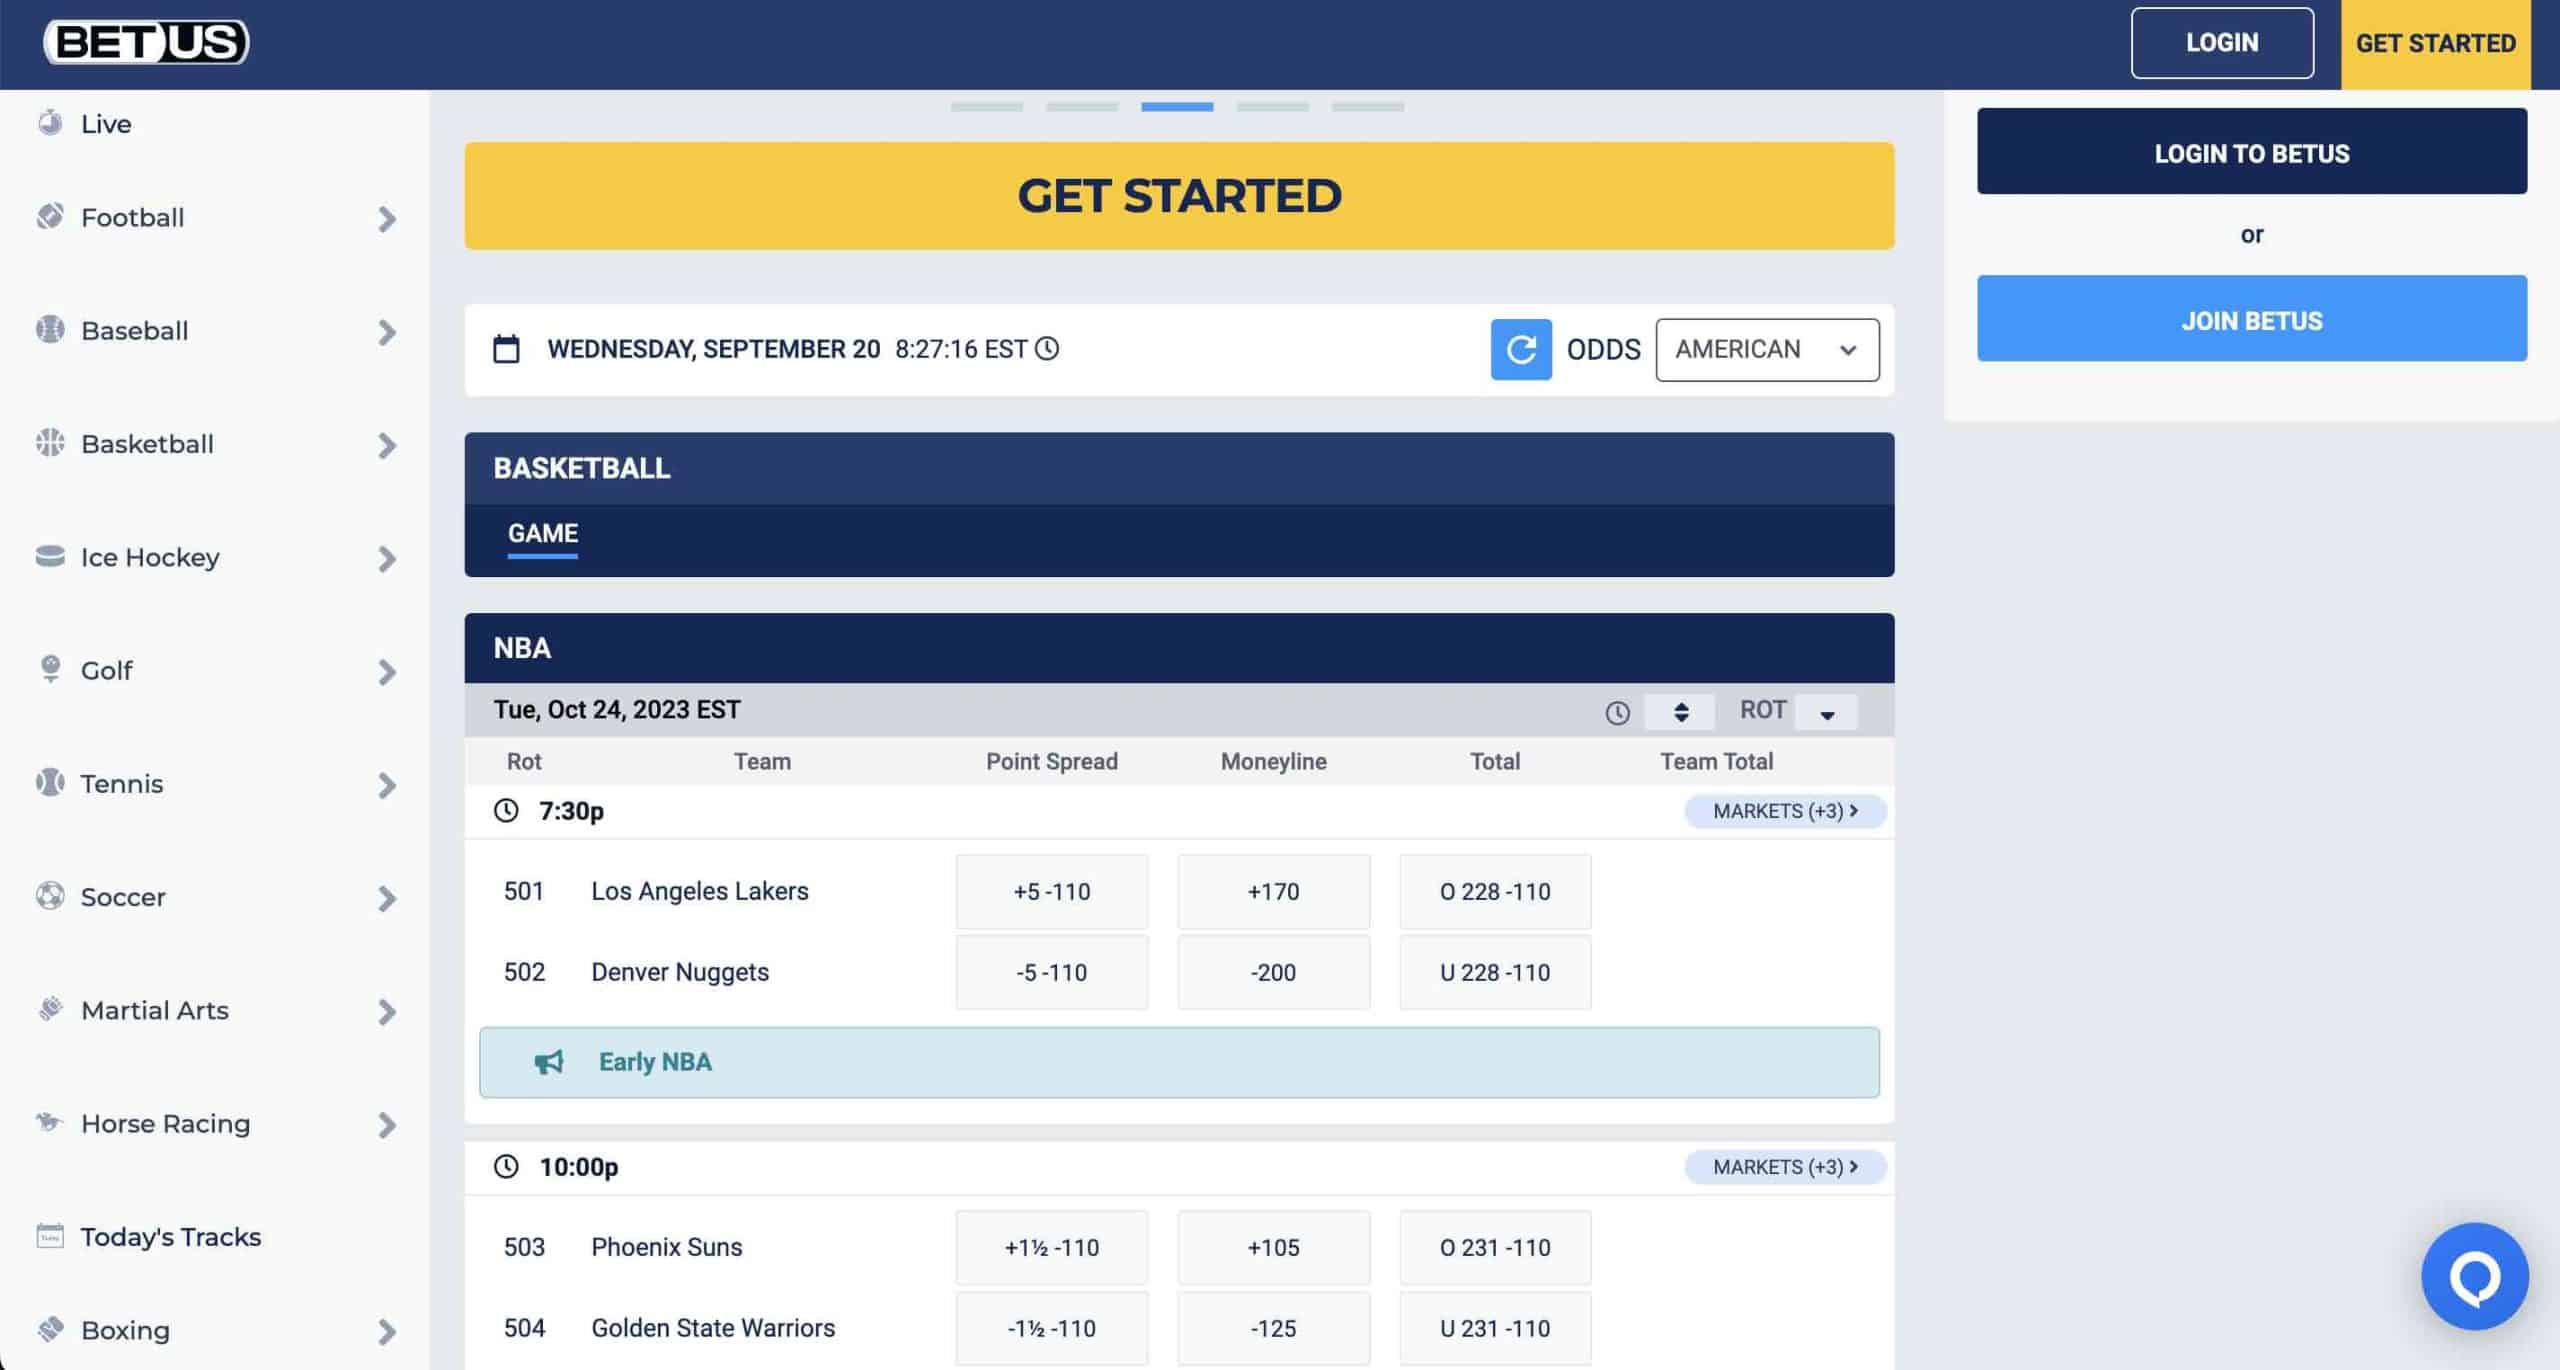 best WI online sports betting sites - A screenshot of some BetUS basketball odds